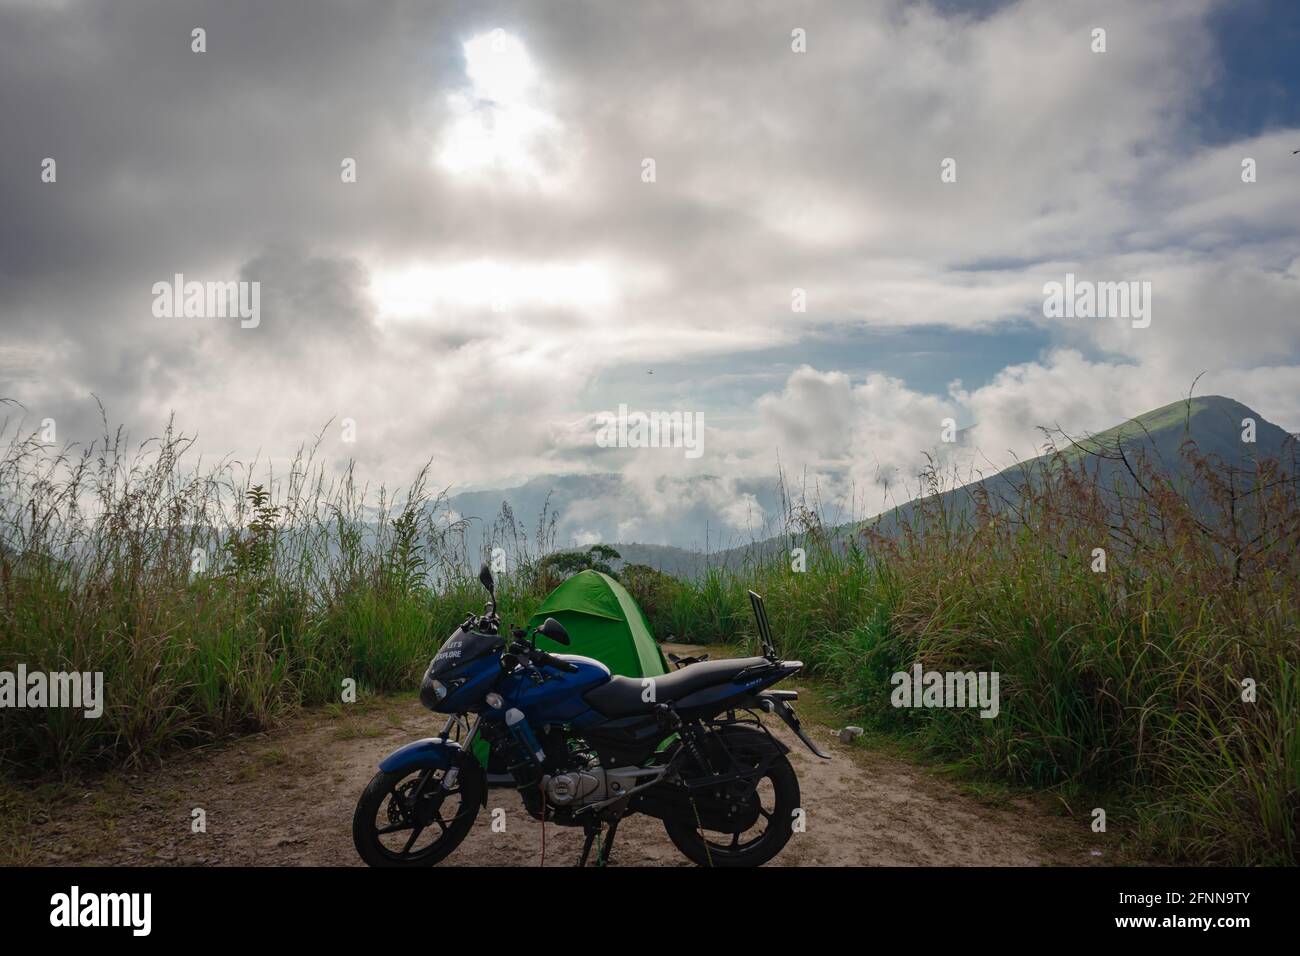 camping site at forests with motorcycle at tent Stock Photo